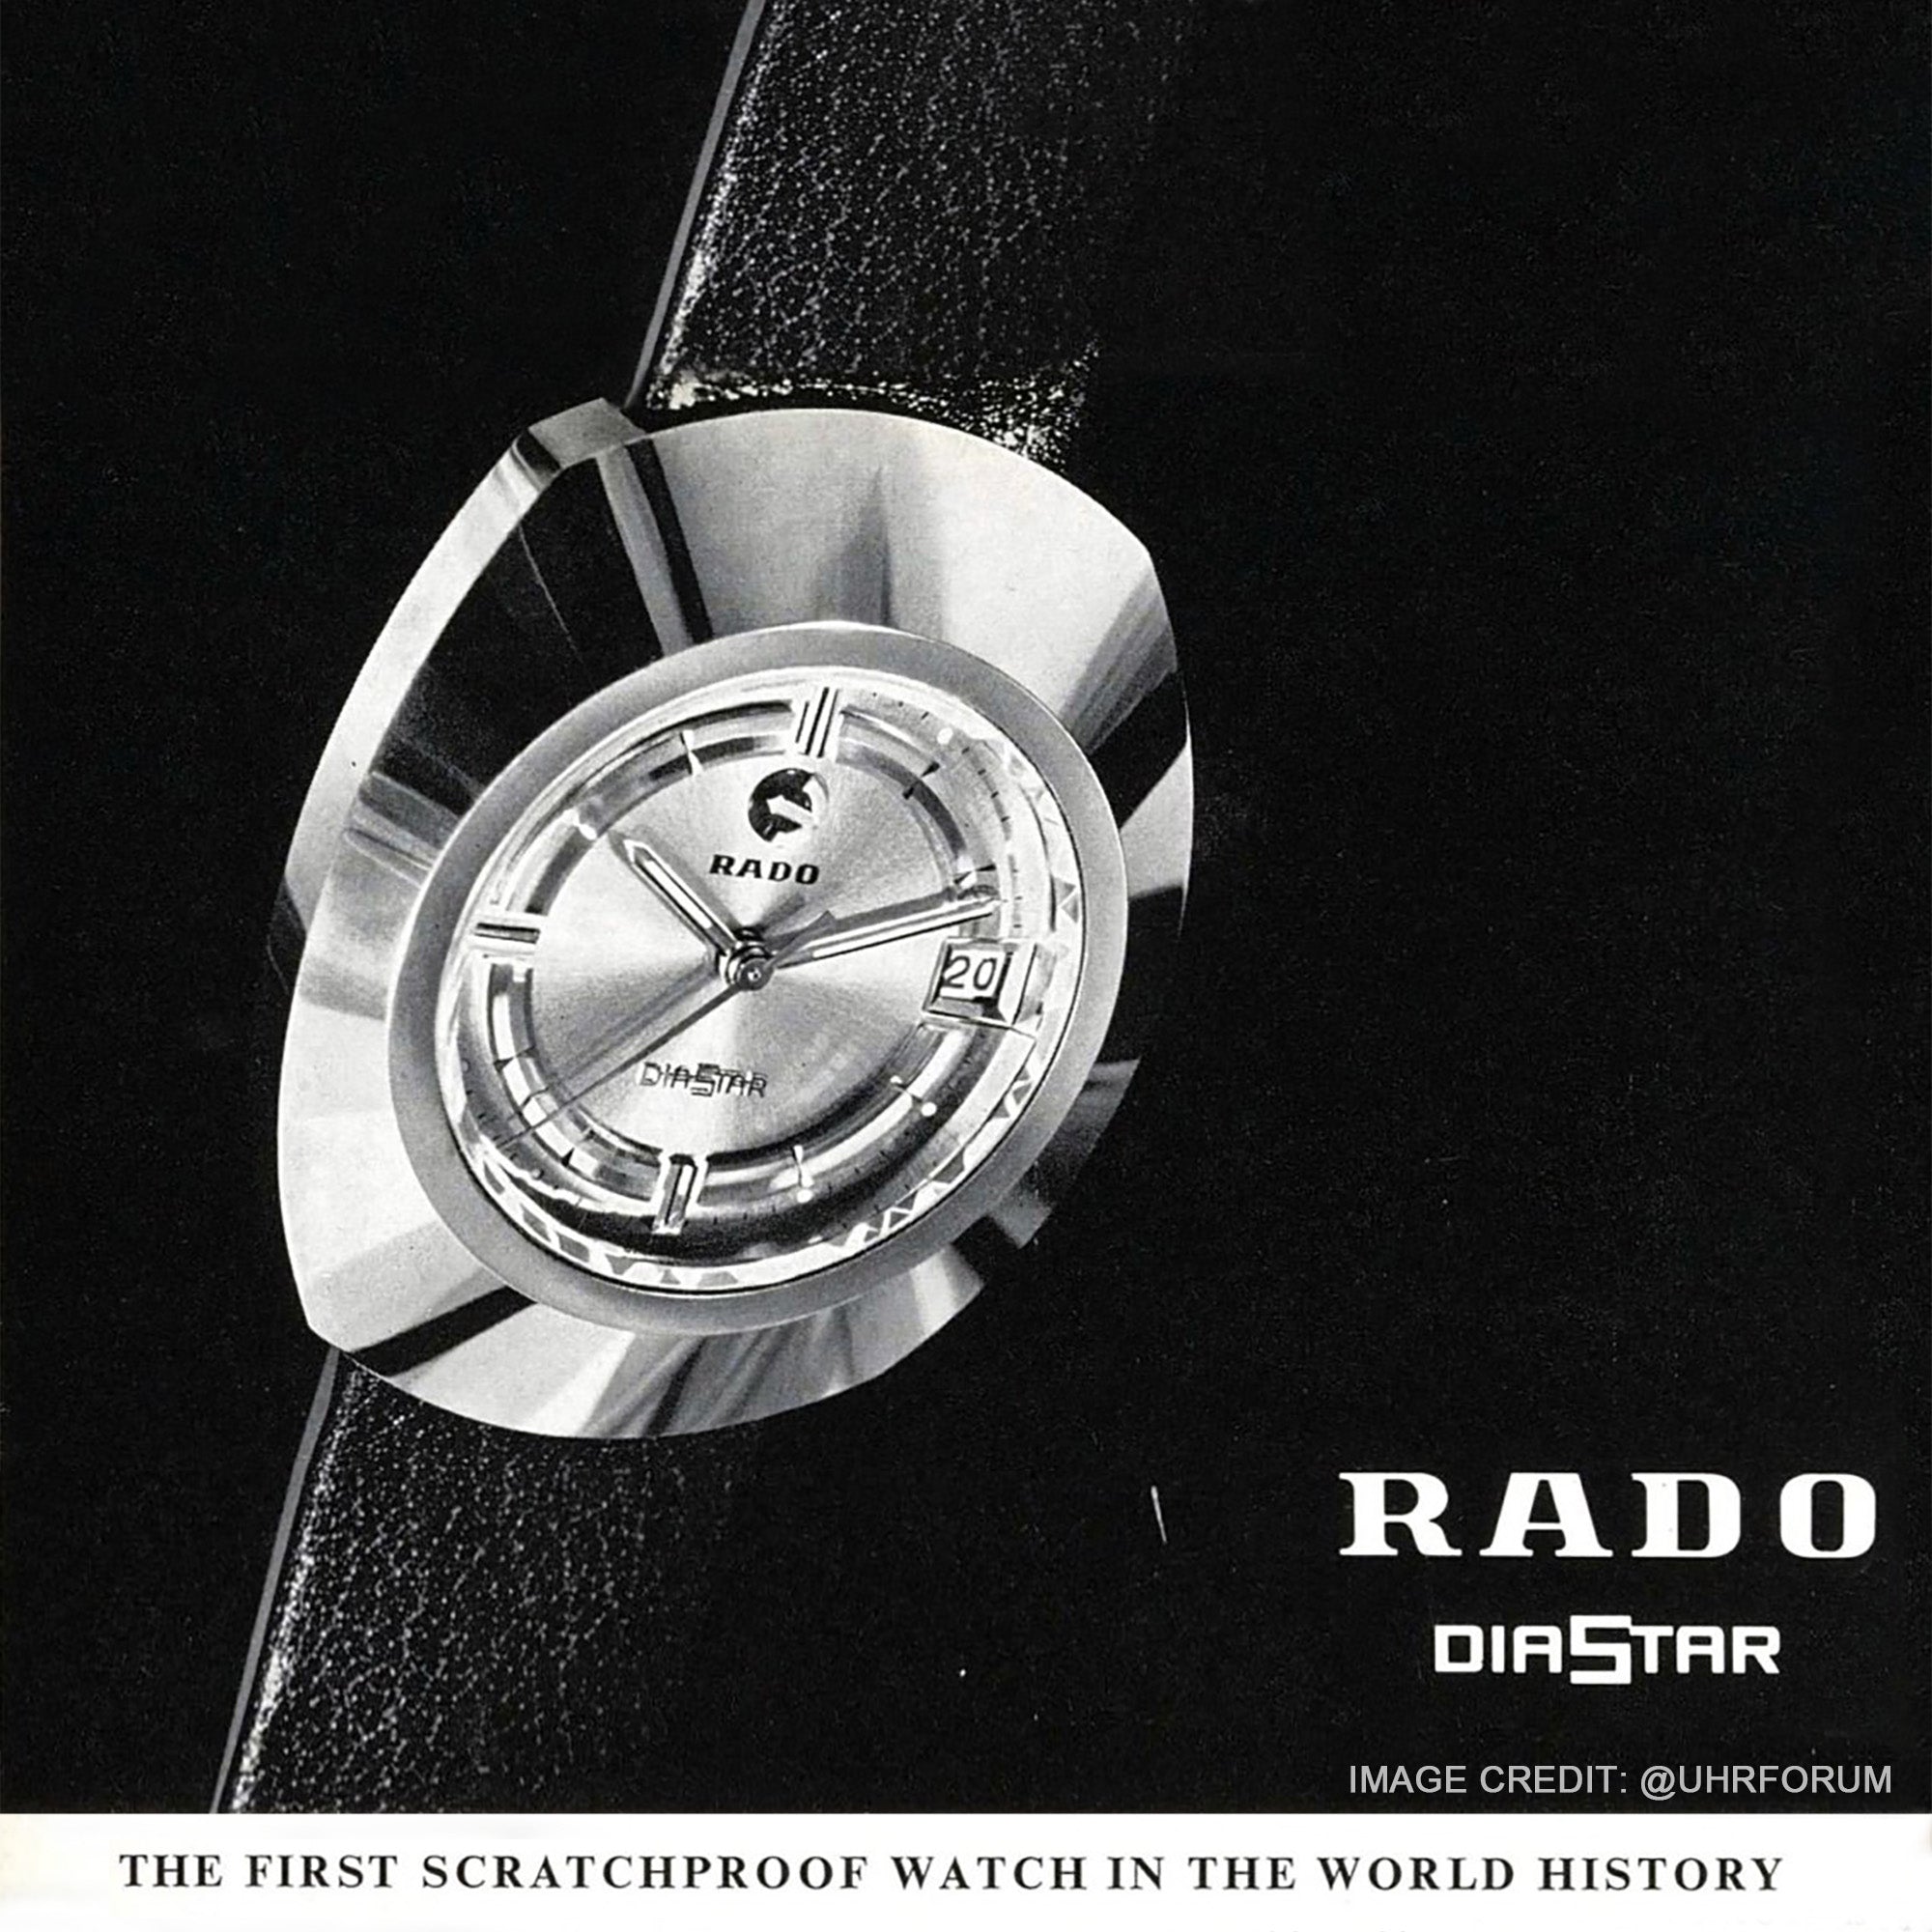 1960 Rado advertised DiaStar as the first scratch-proof watch in world history